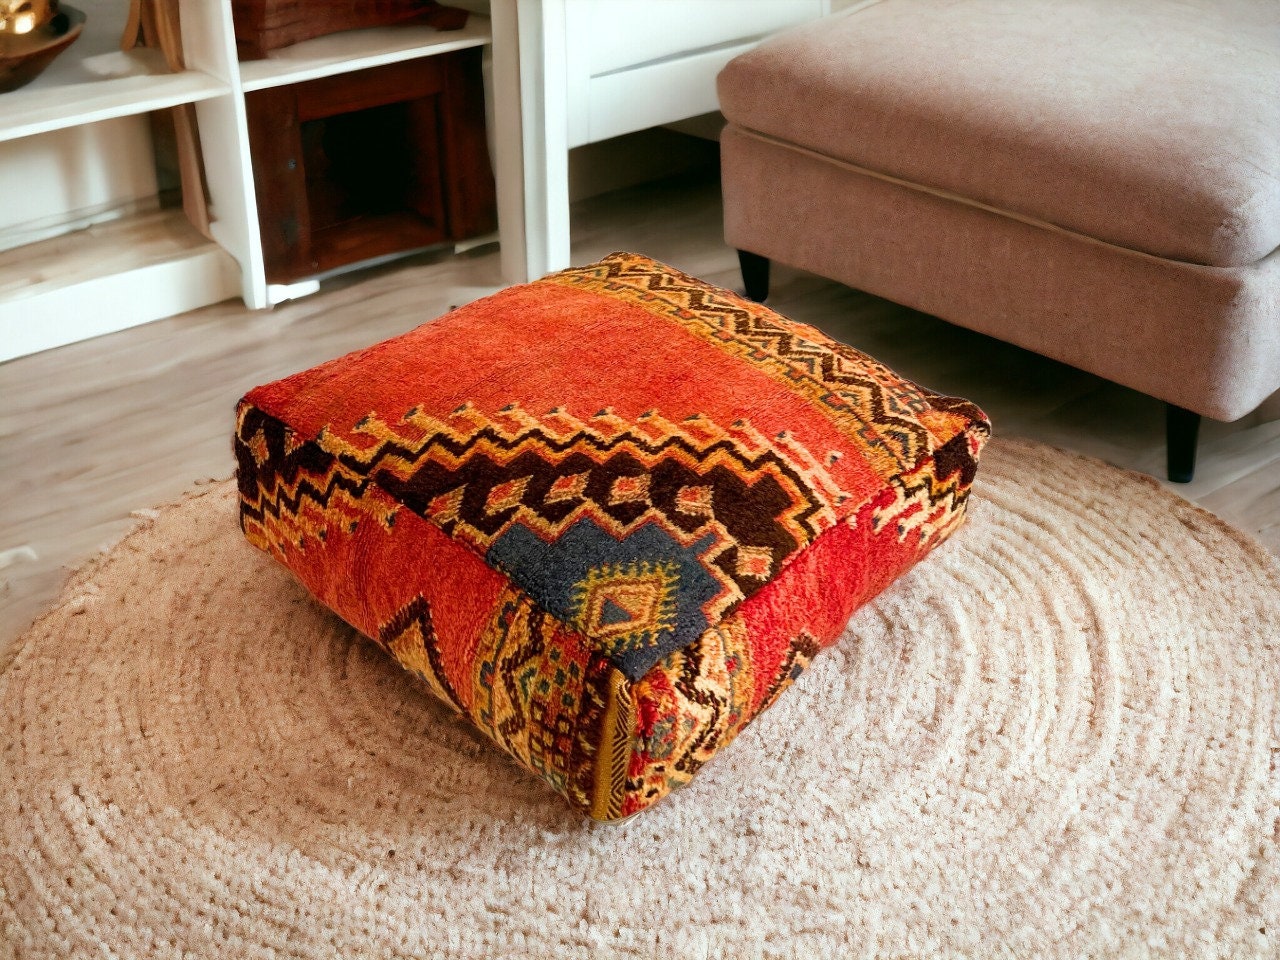 Round Pouf Insert, Moroccan Pouf Filler, Moroccan Footstool Insert